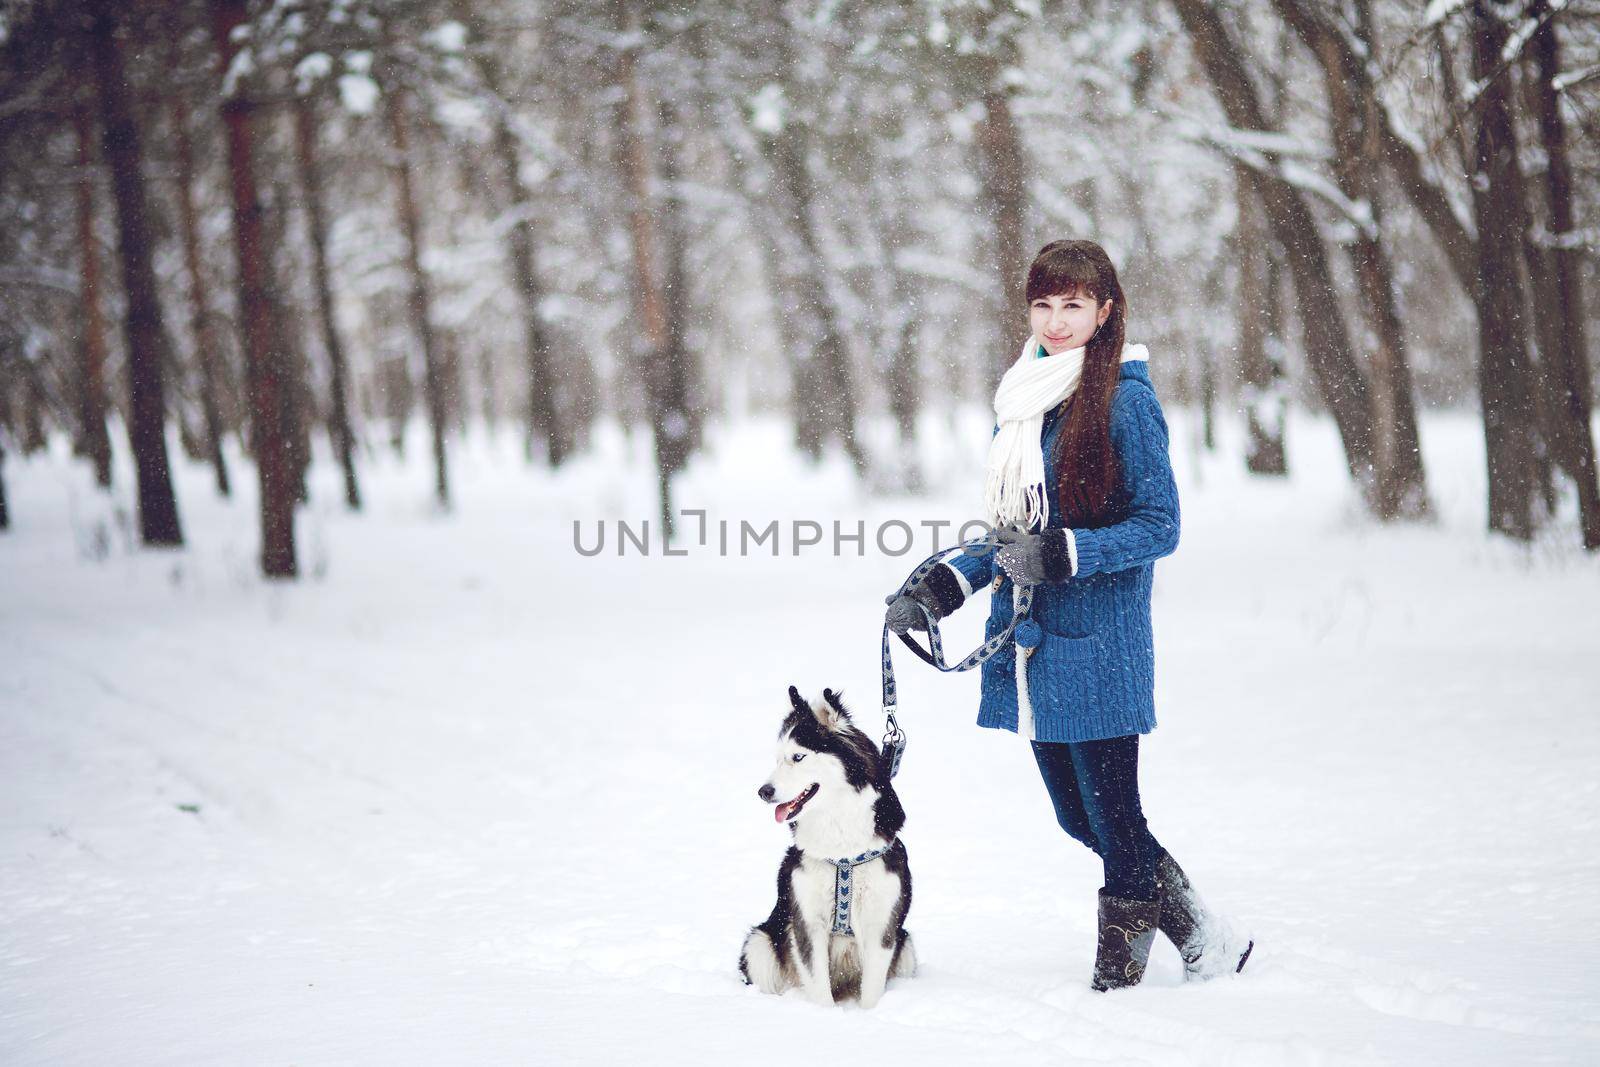 Girl walks with dog siberian husky in winter snowy forest by selinsmo